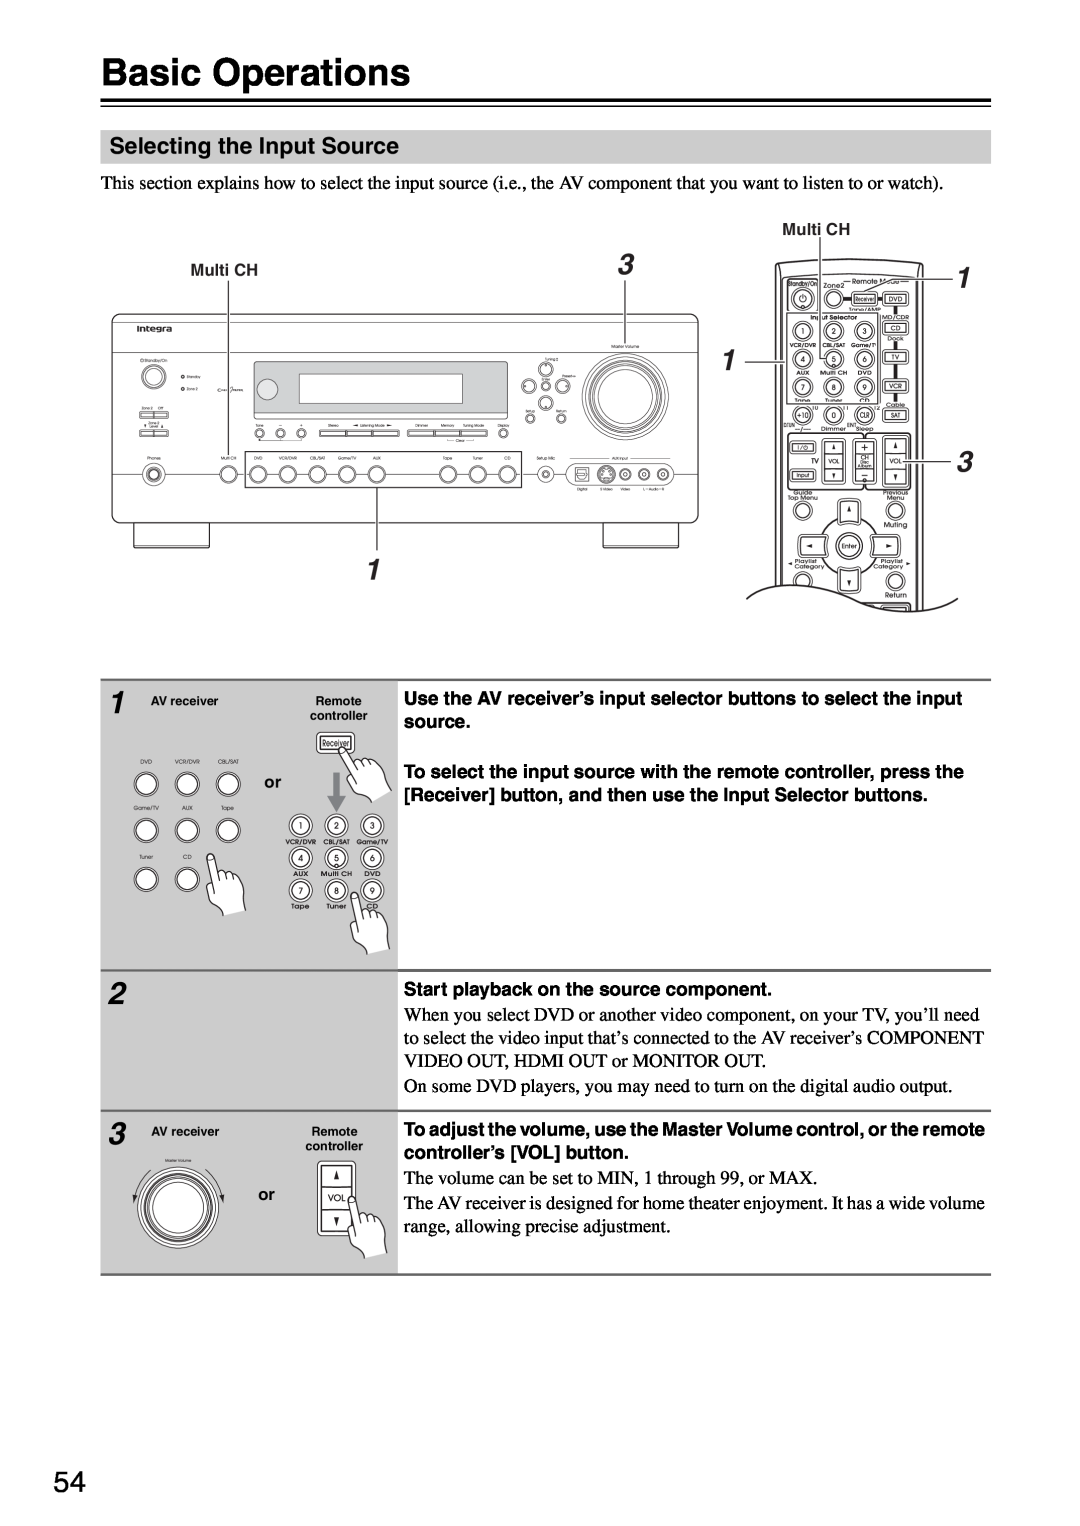 Integra DTR-5.8 instruction manual Basic Operations, 1 3 1, Selecting the Input Source 